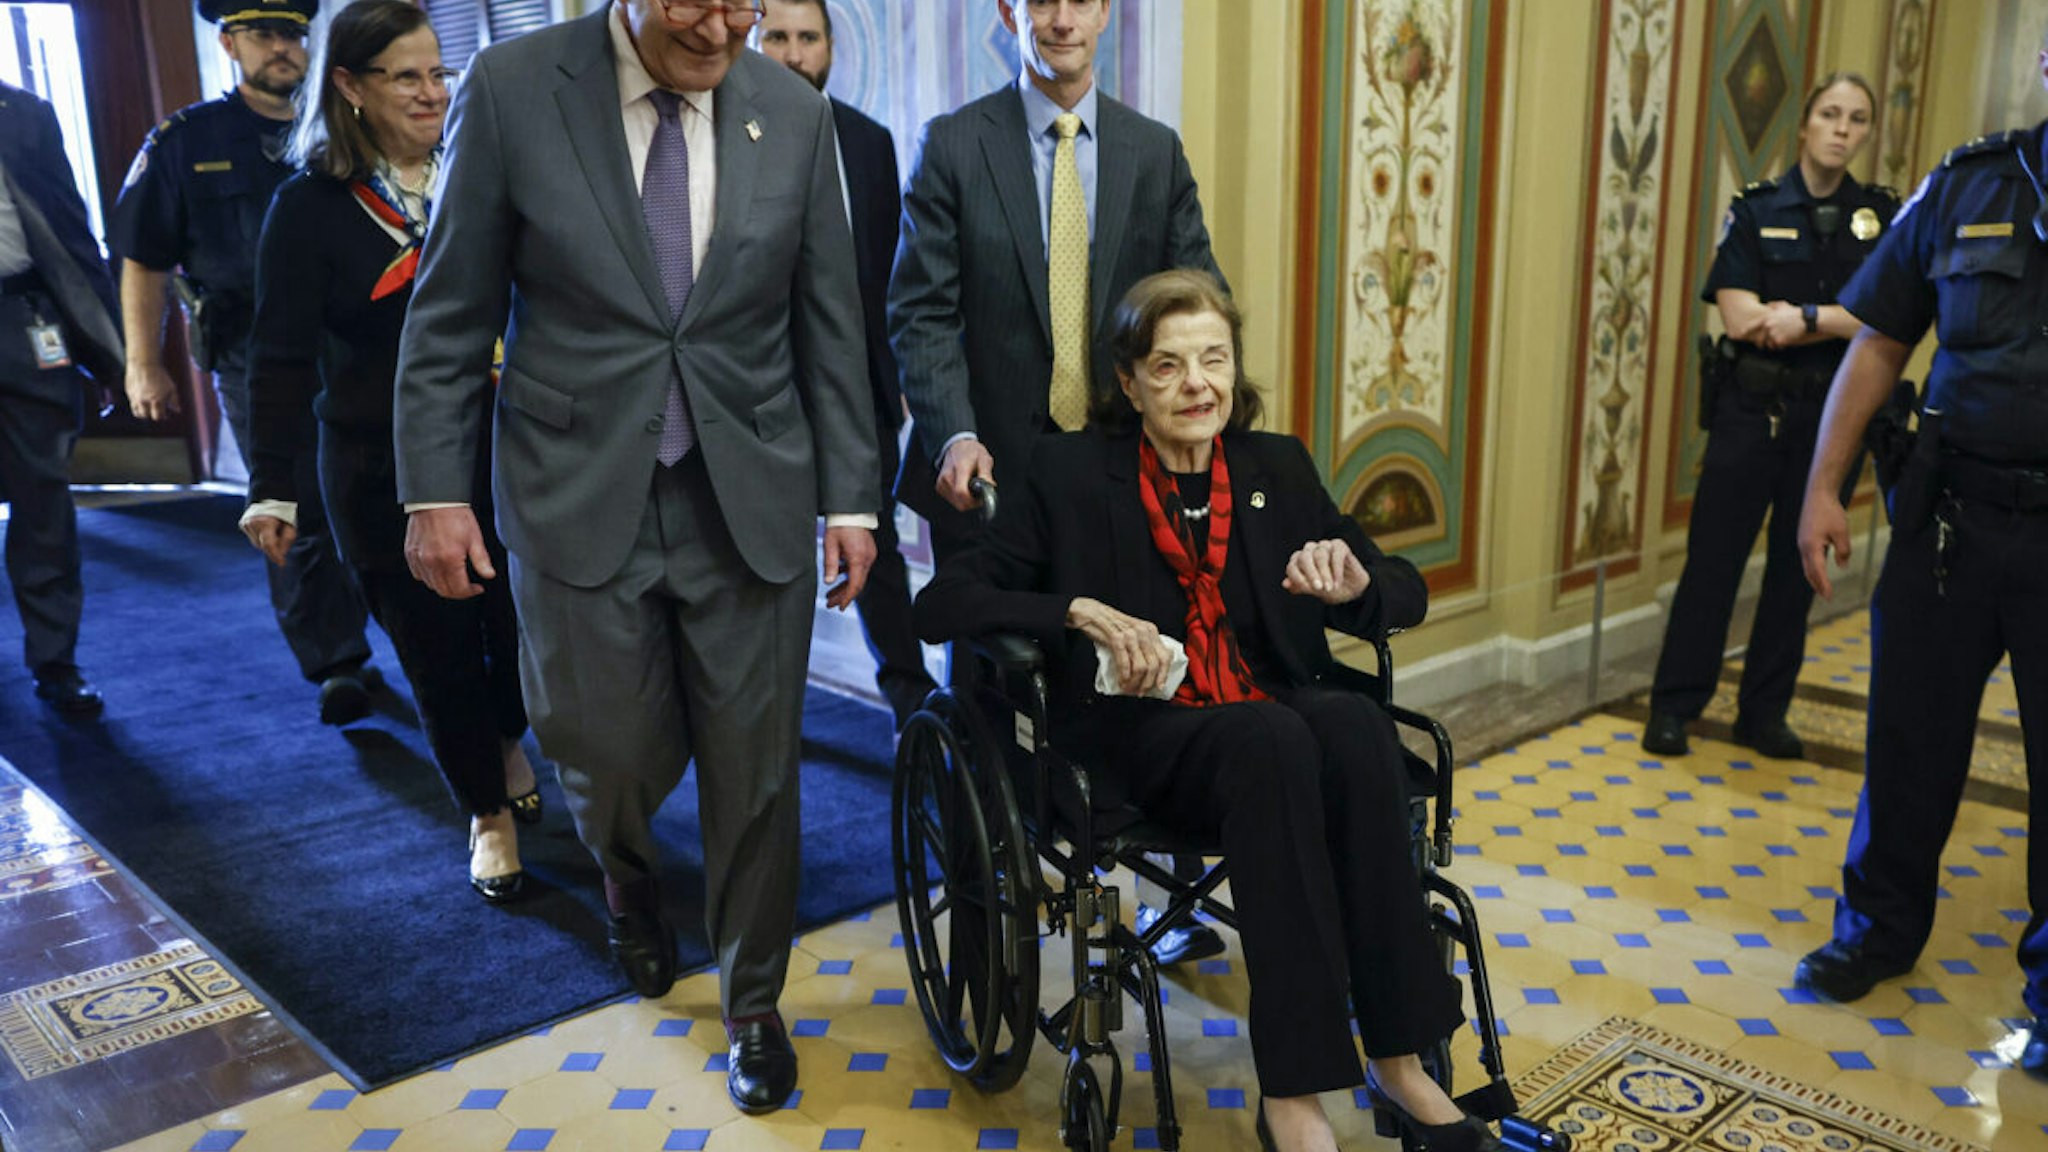 U.S. Senate Majority Leader Charles Schumer (D-NY) escorts Sen. Dianne Feinstein (D-CA) as she arrives at the U.S. Capitol following a long absence due to health issues on May 10, 2023 in Washington, DC.